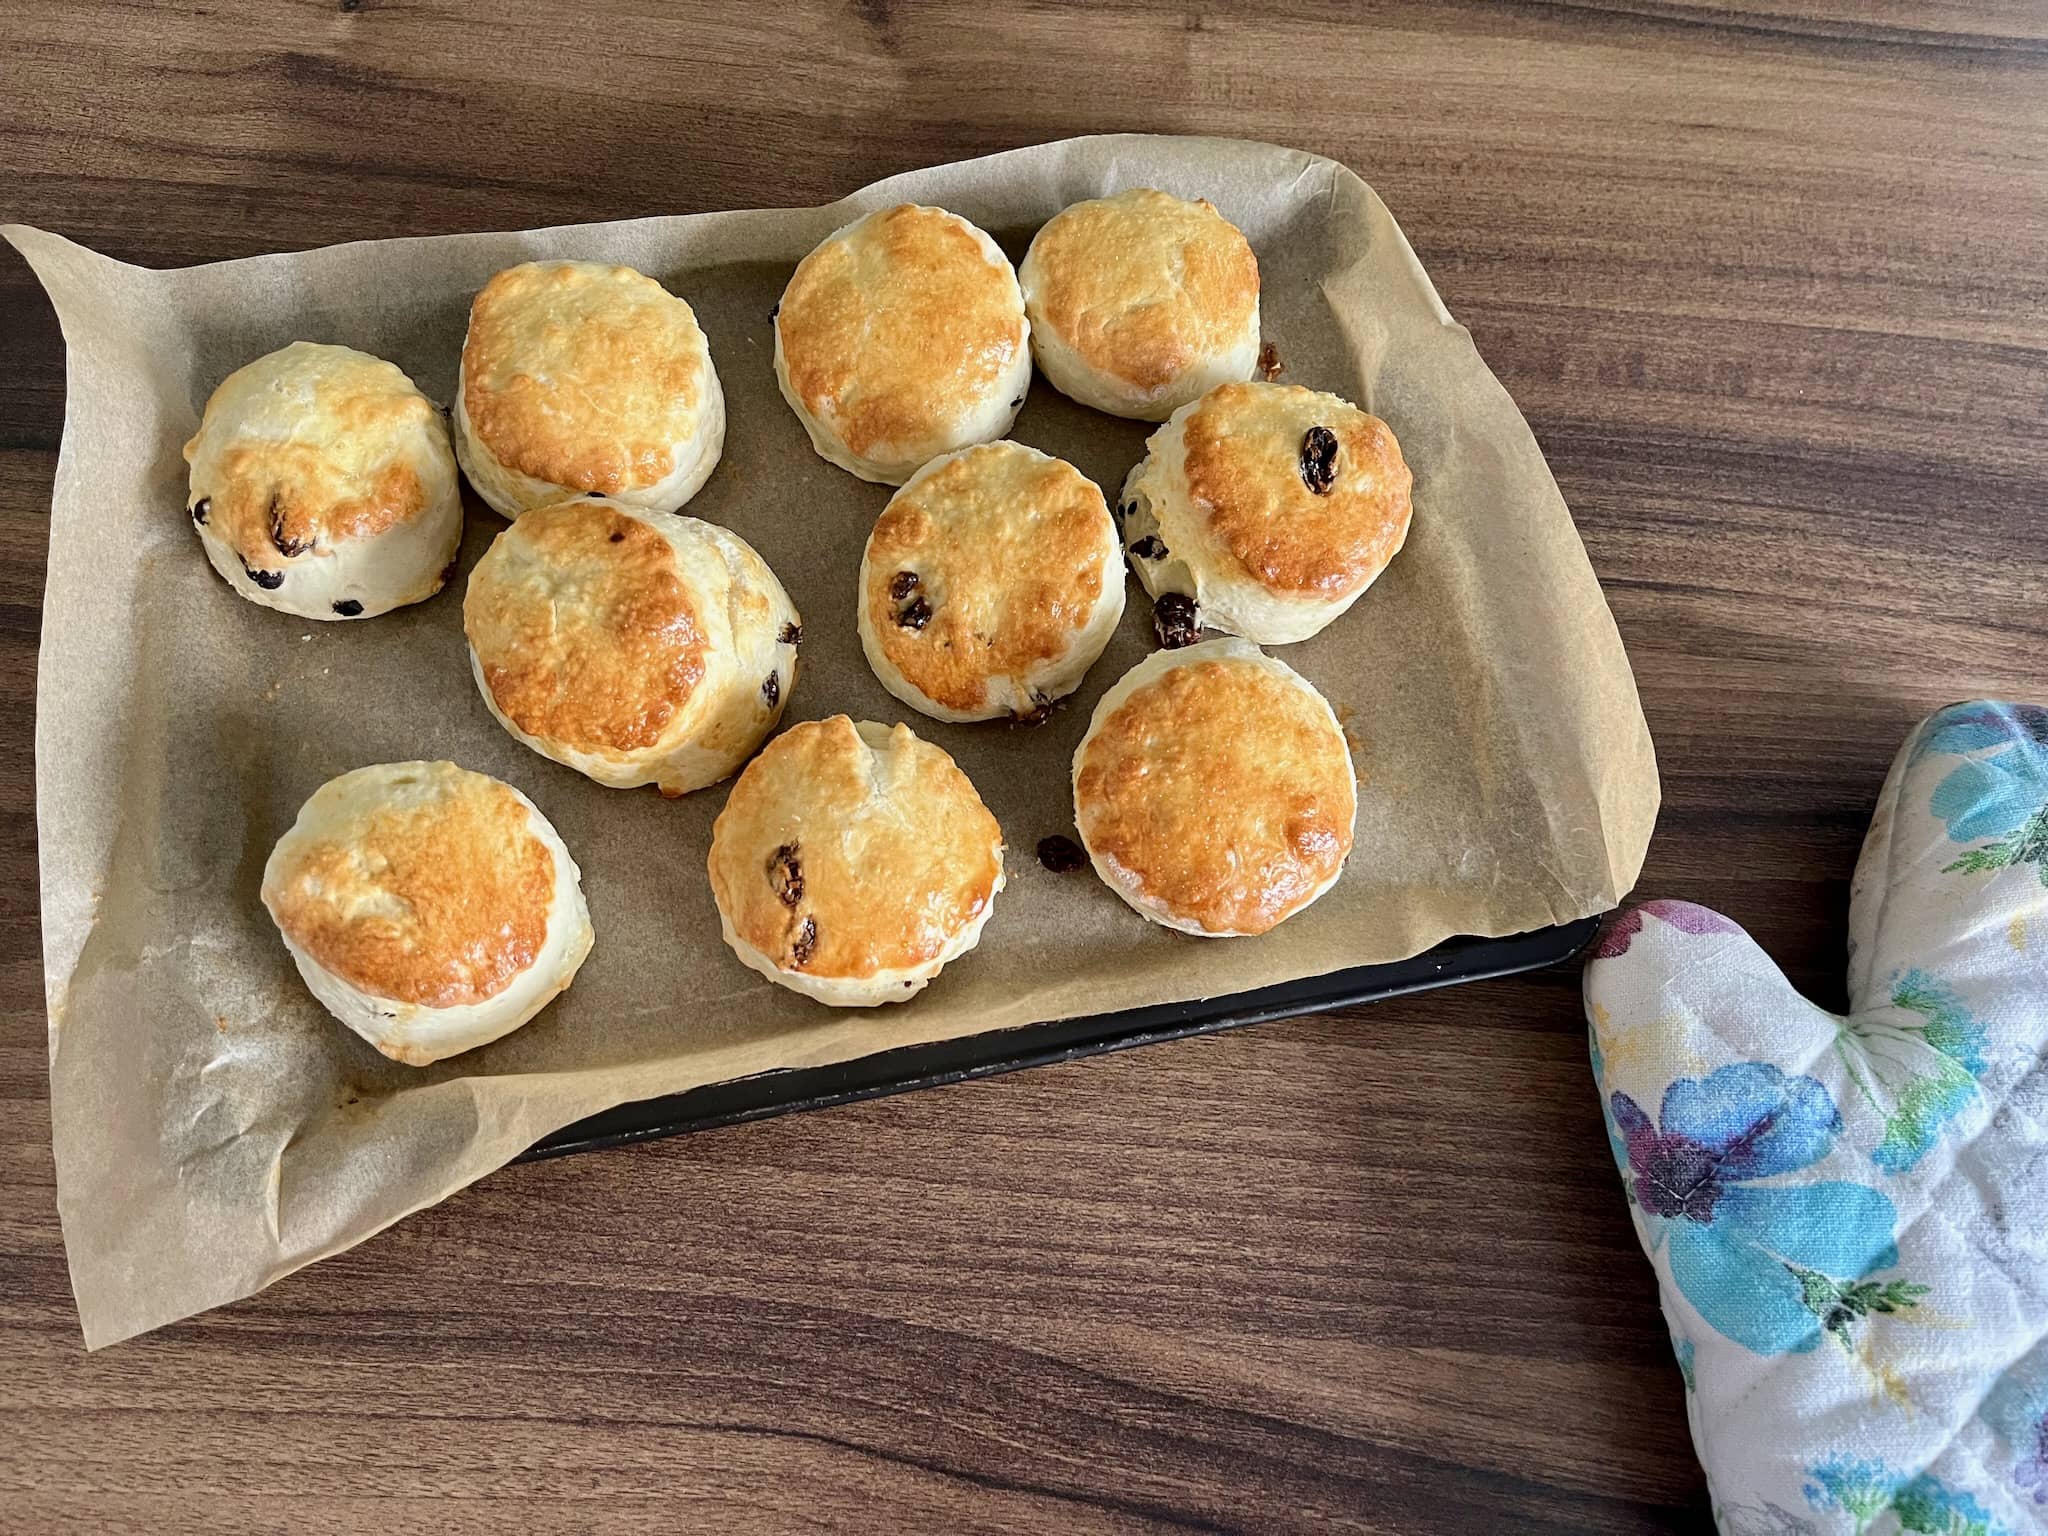 Perfectly baked scones right from the oven